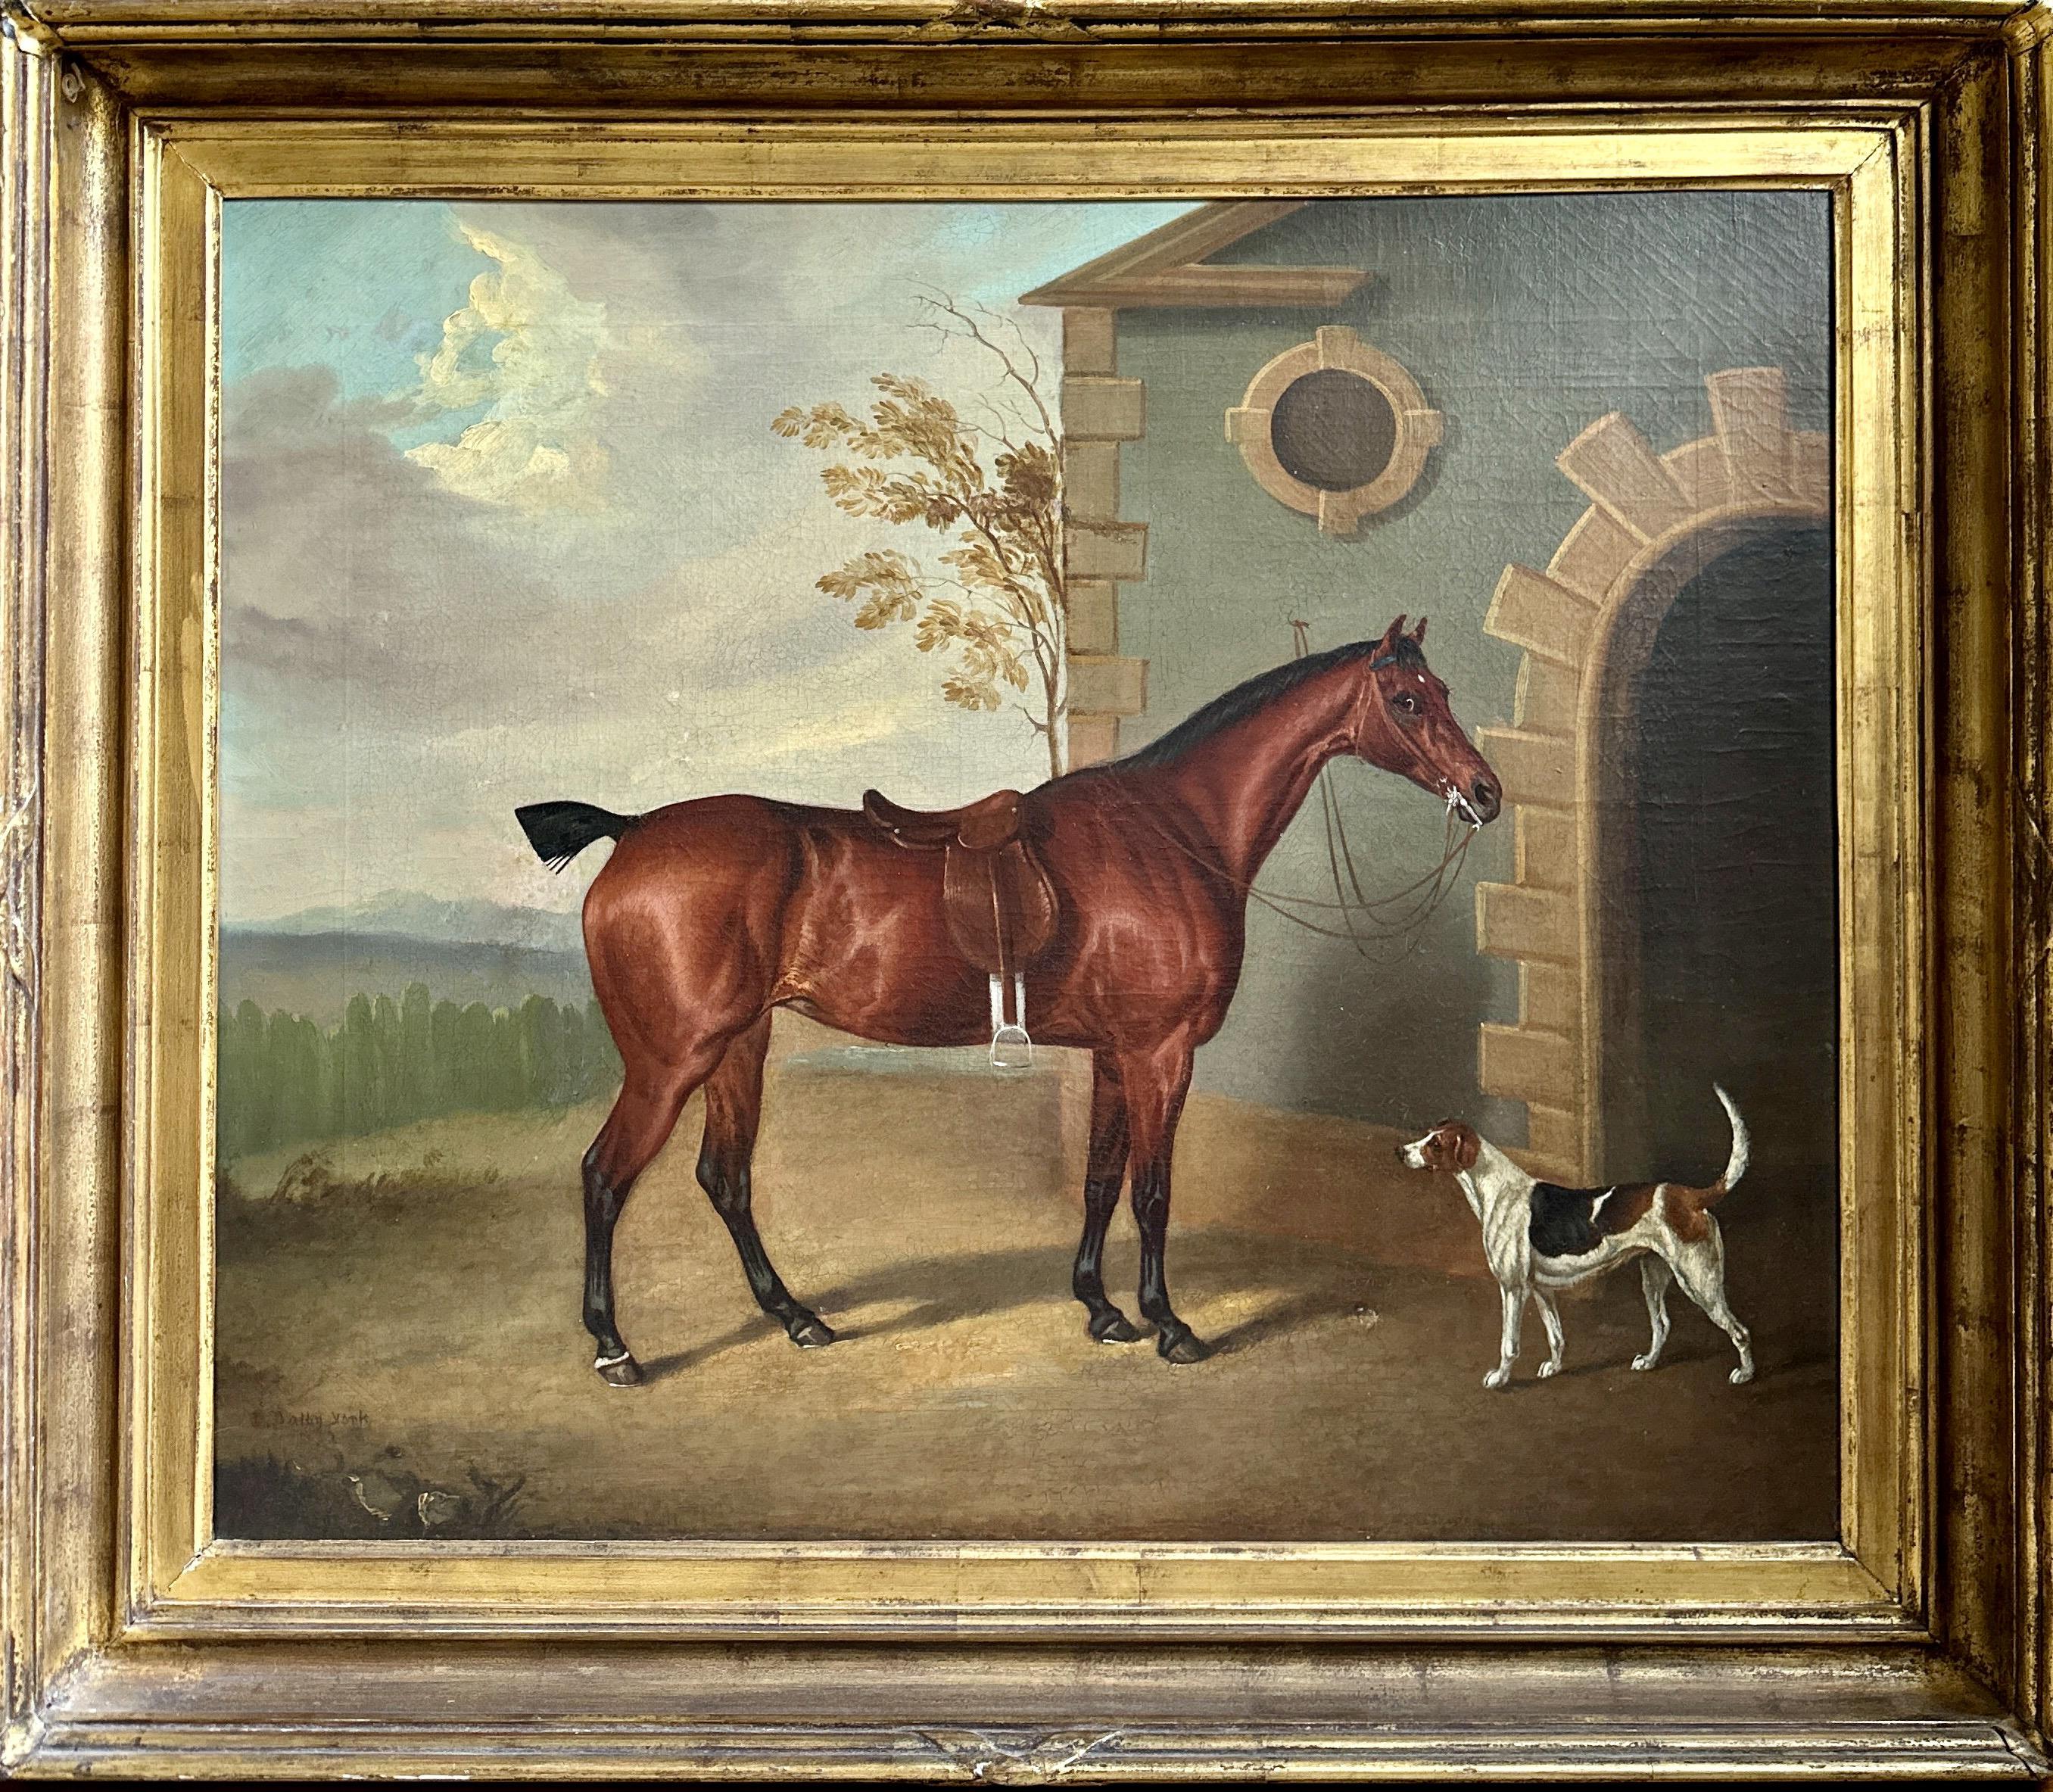 David Dalby of York Portrait Painting - 19th century painting of a Chestnut Hunter and a companion hound